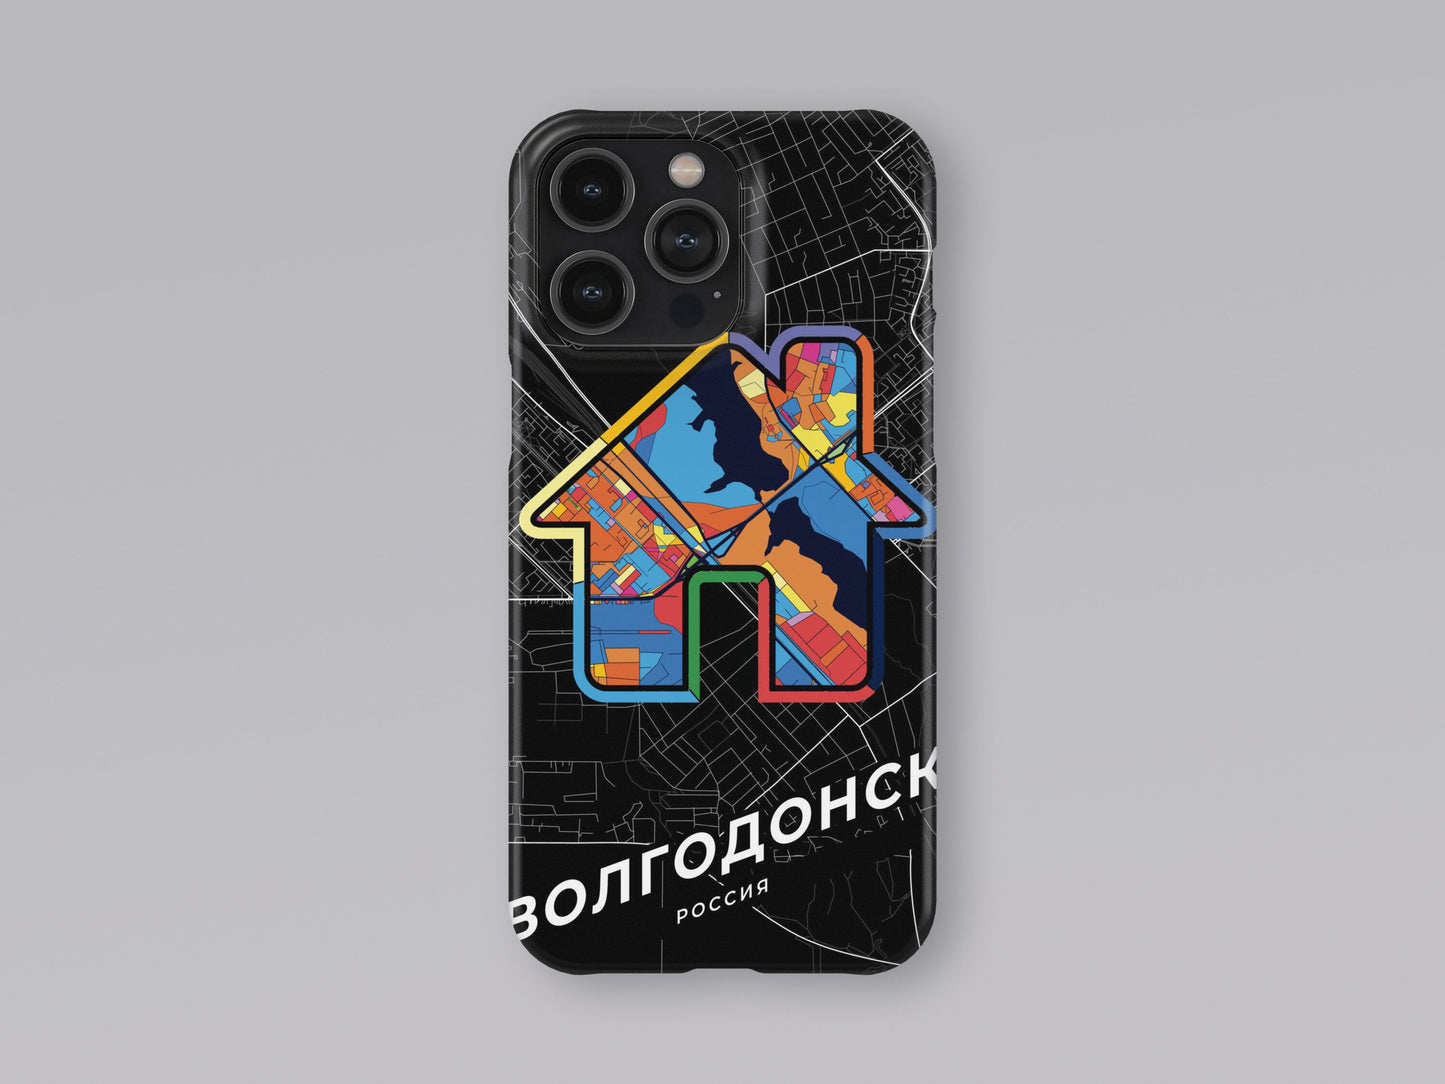 Volgodonsk Russia slim phone case with colorful icon 3